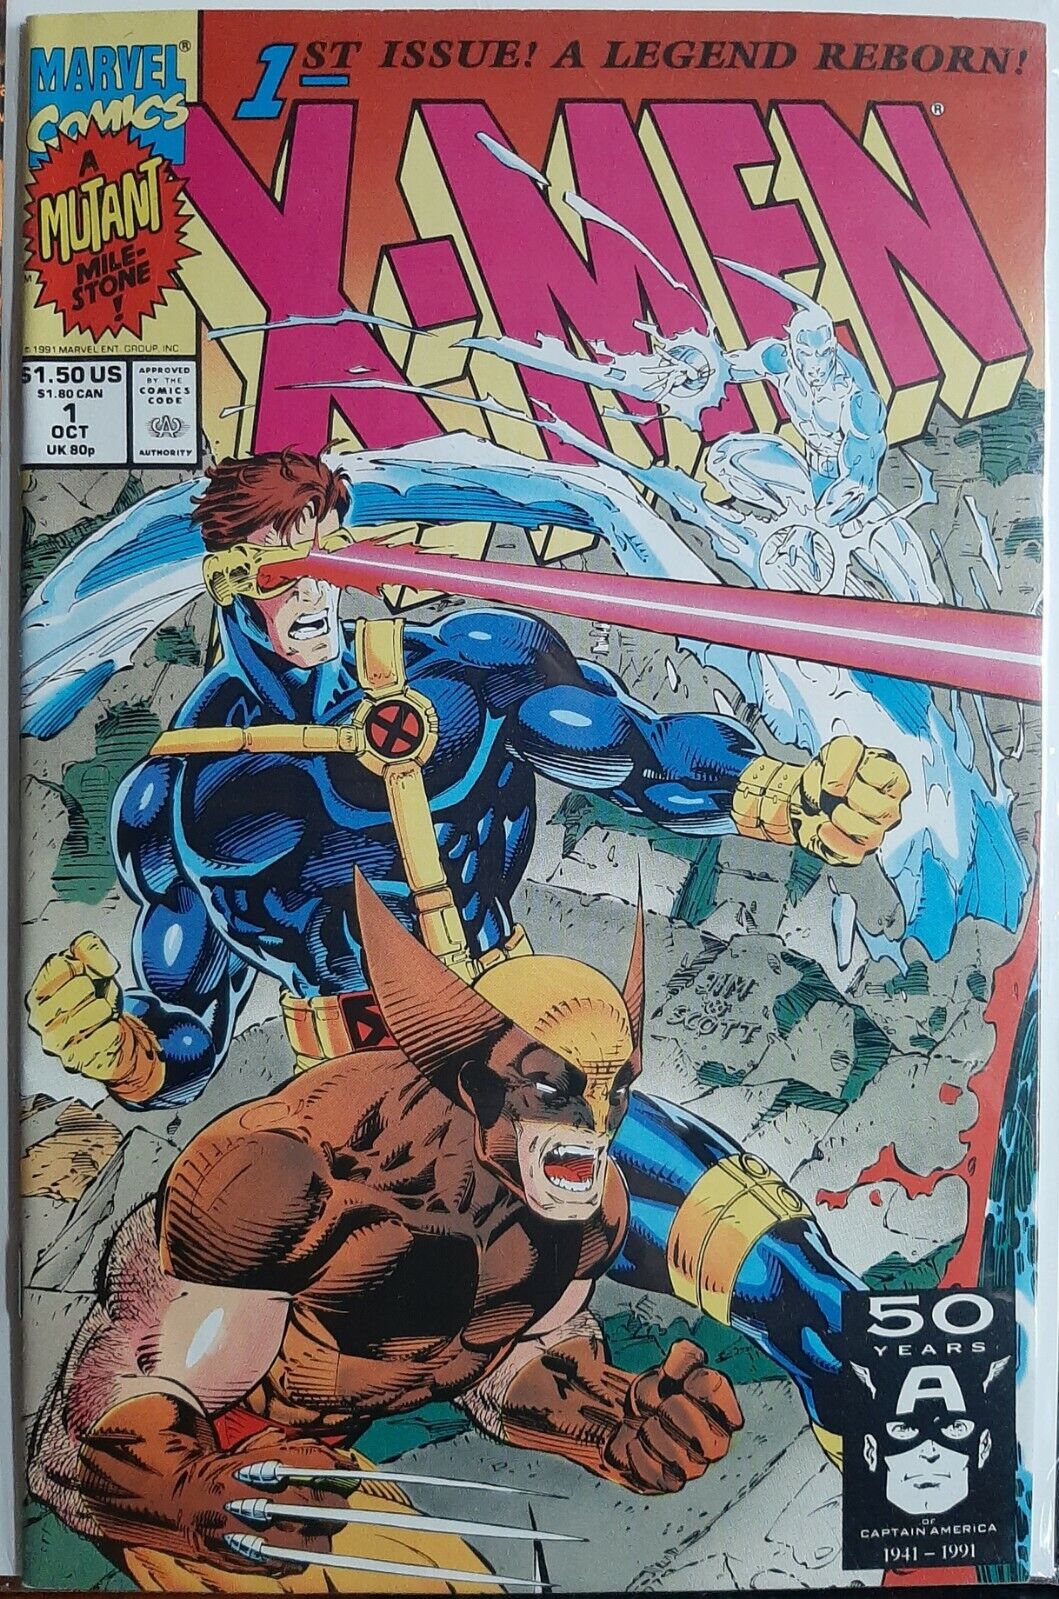 2 copies X-men #1 1991. ☆LOWEST PRICE for this edition. Near Mint+*